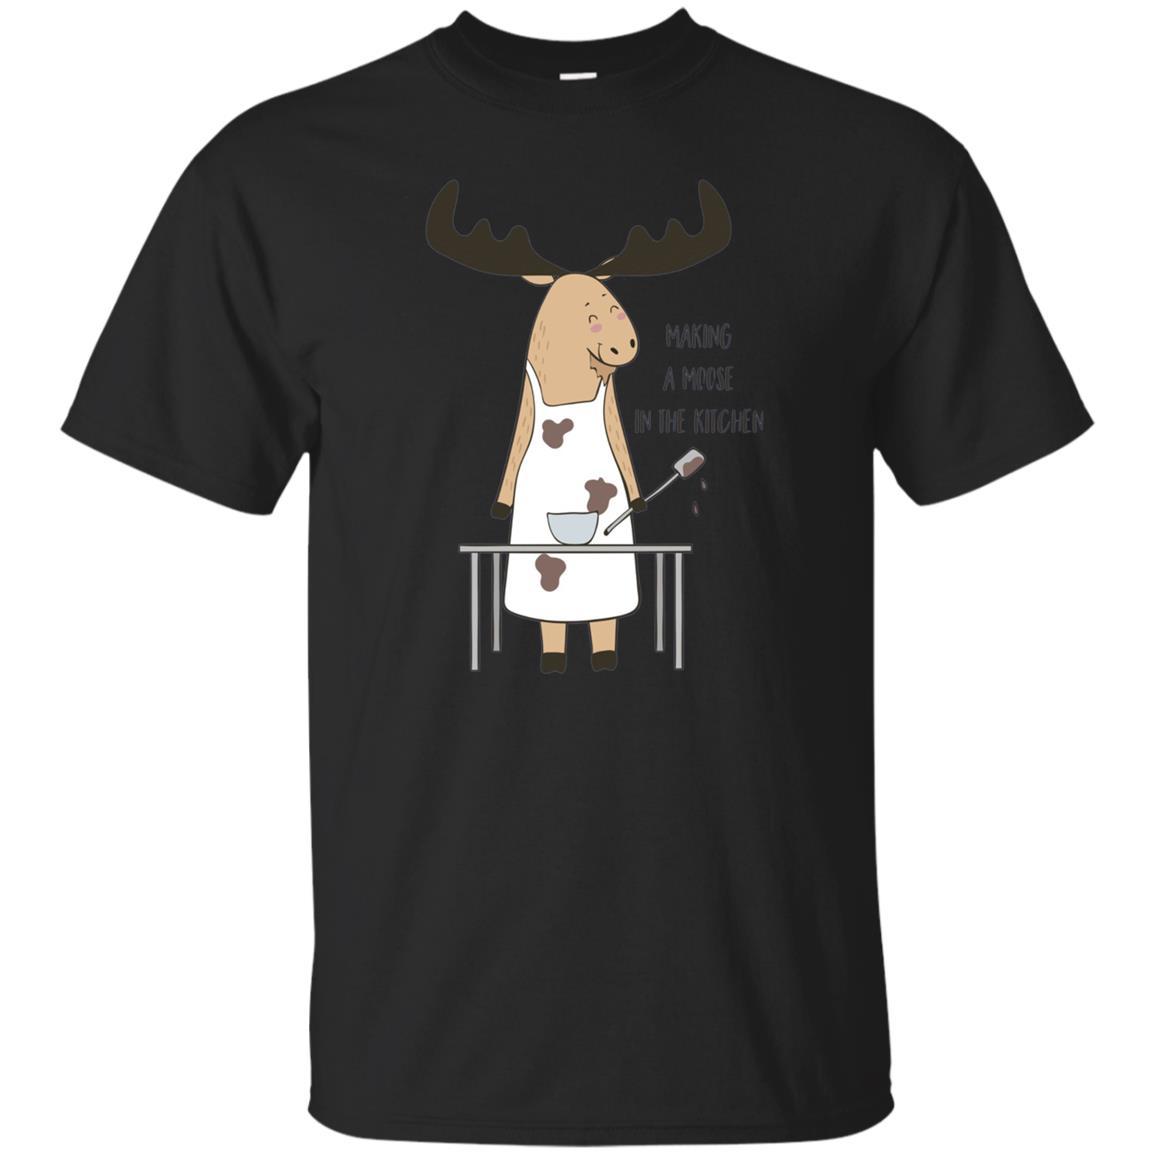 Making A Moose In The Kitchen - Funny Moose Cooking T-shirt